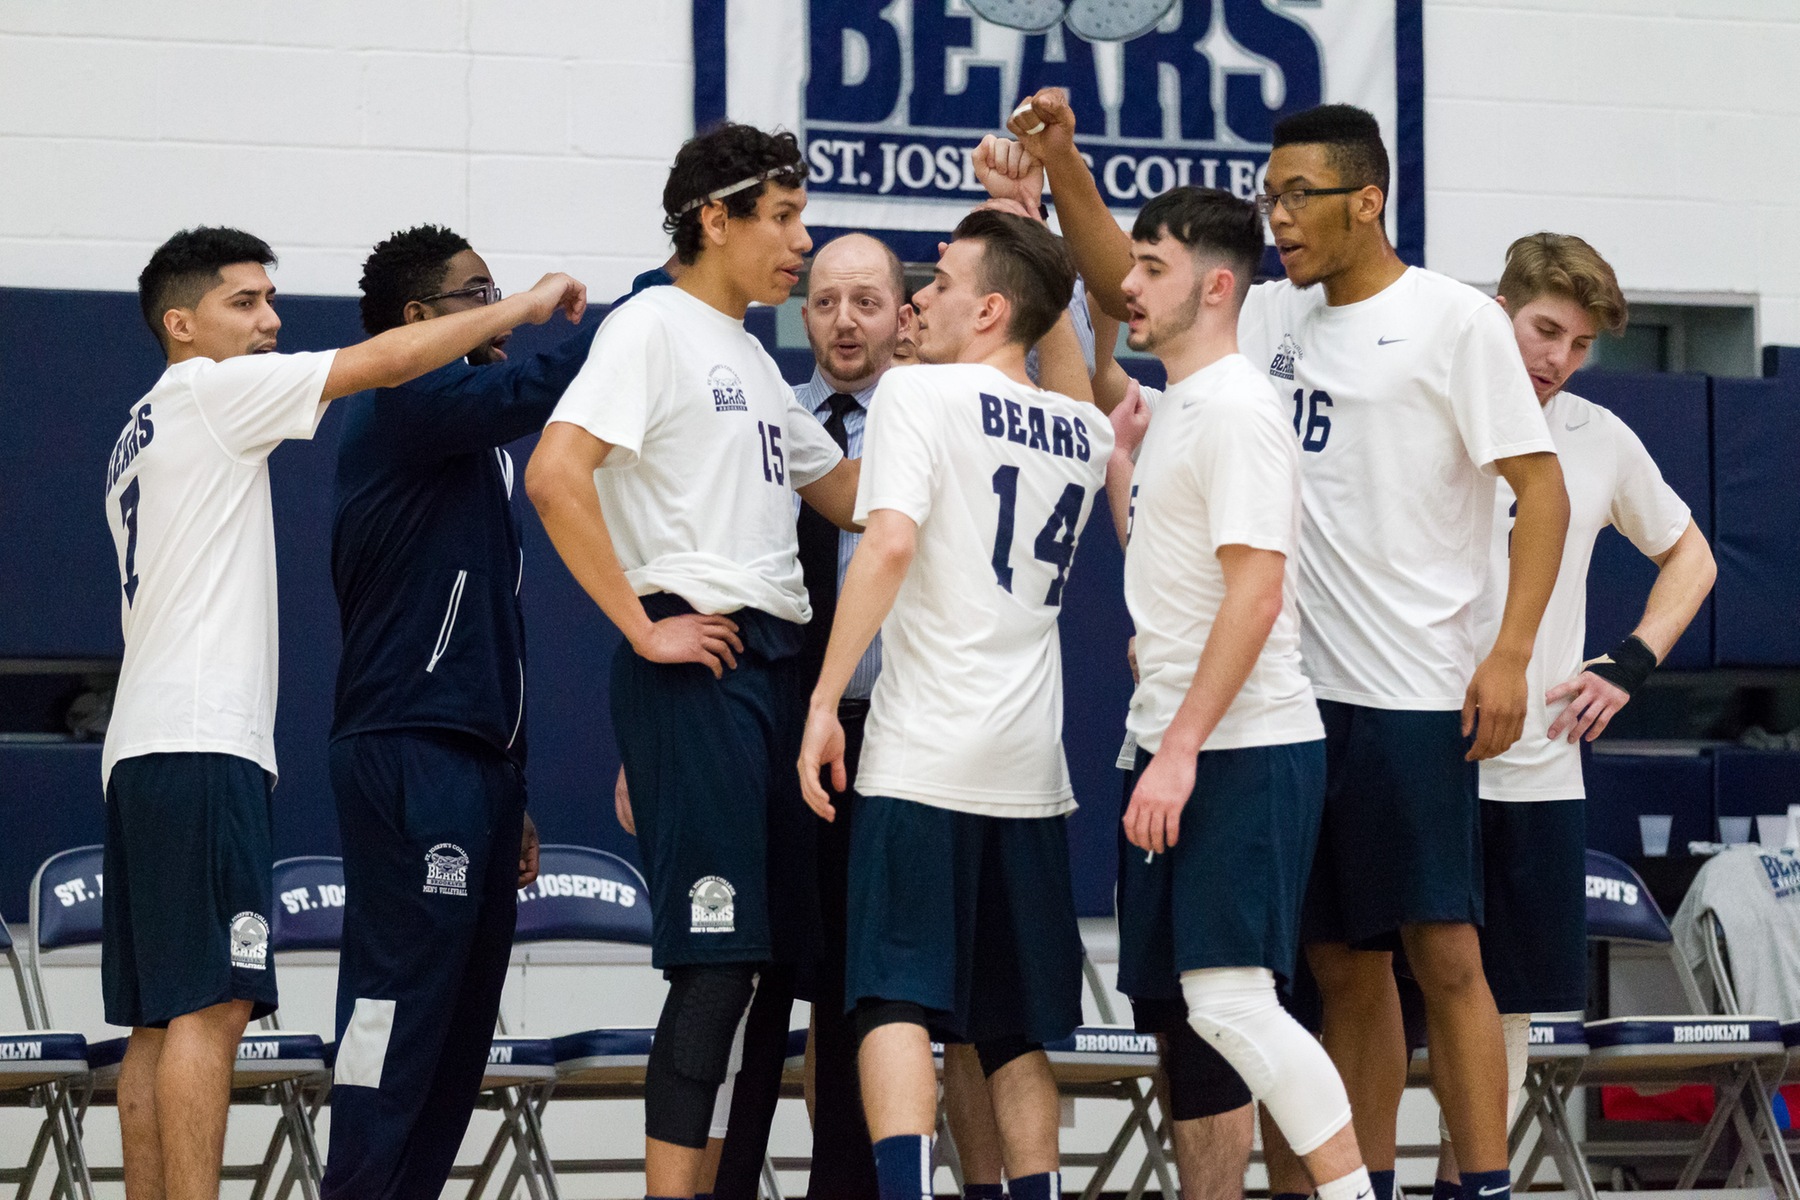 Men’s Volleyball Sweeps Sarah Lawrence in Tri-Match Split